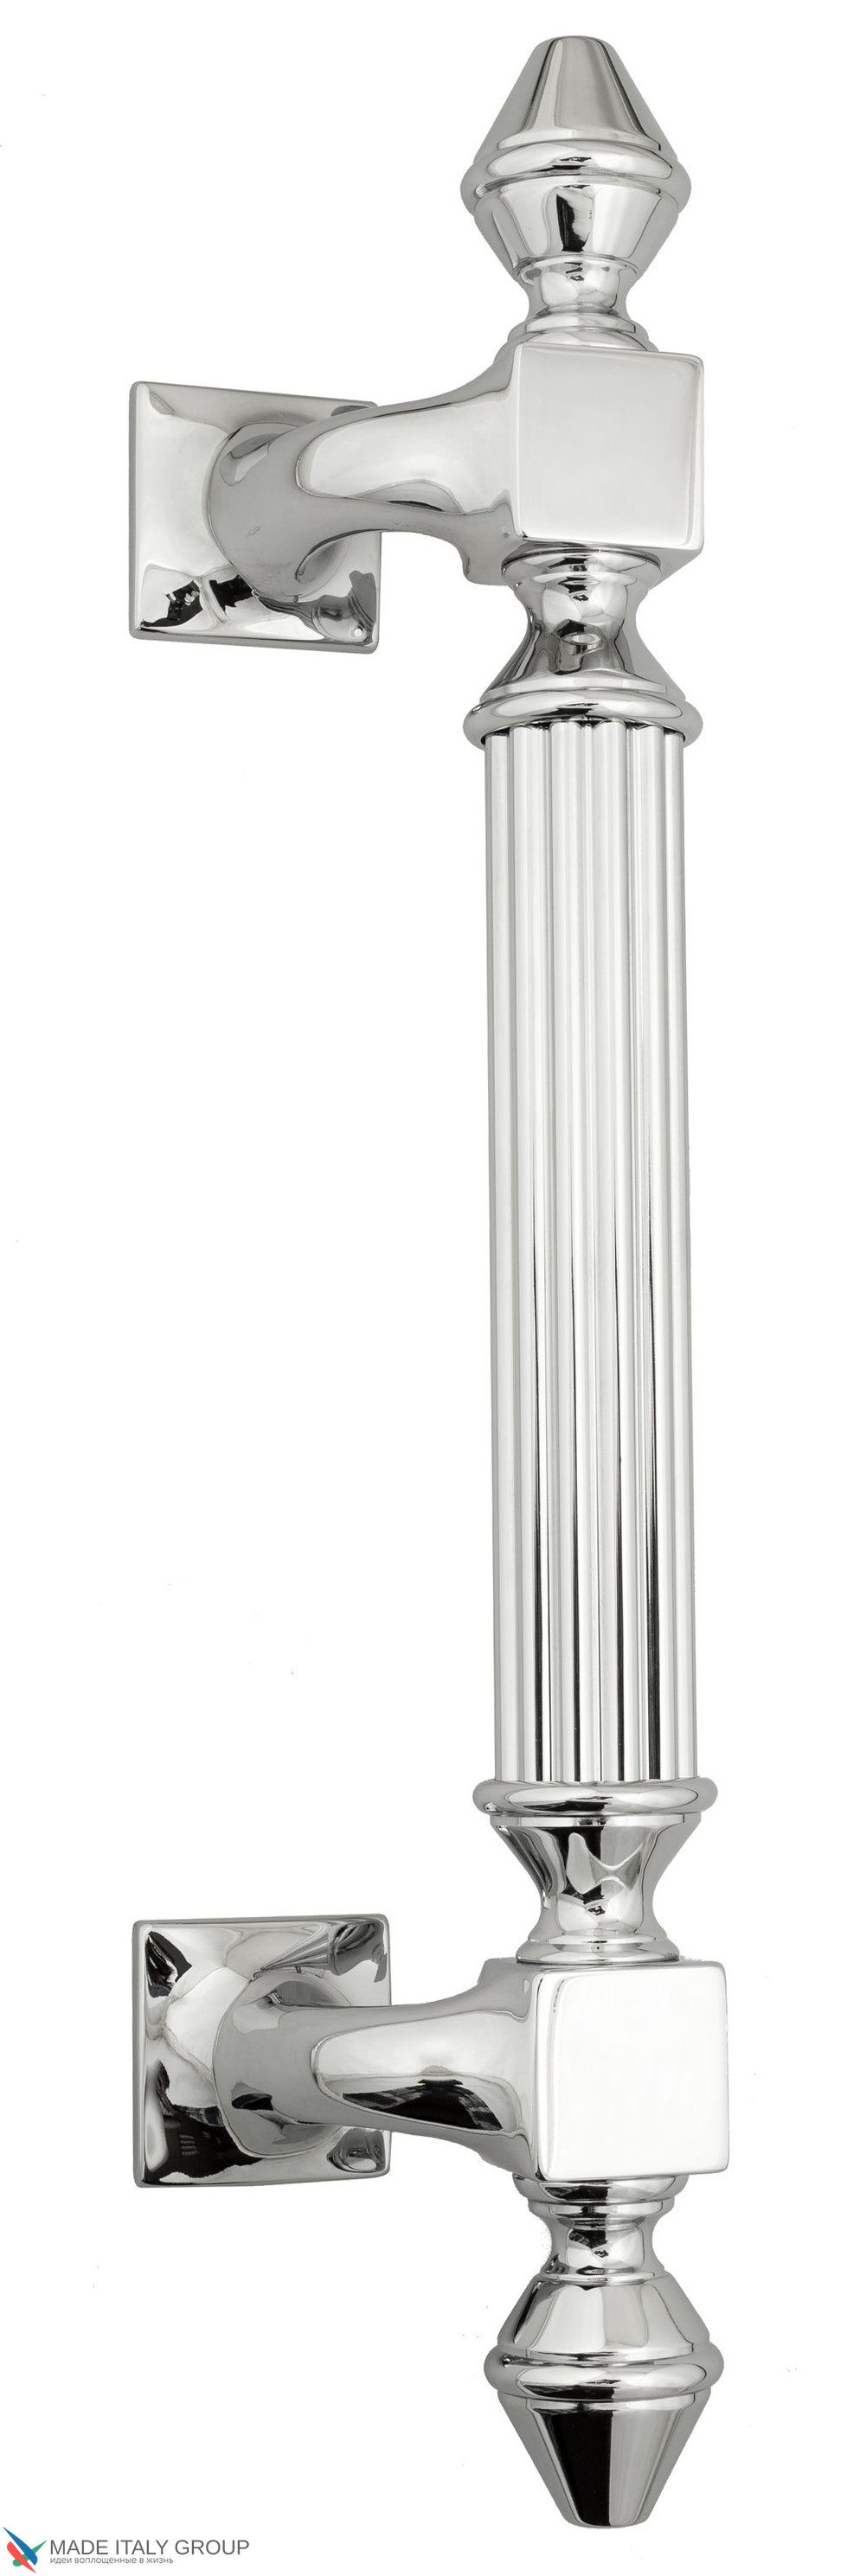 Pull Handle Venezia  IMPERIONE  365mm (235mm) Polished Chrome